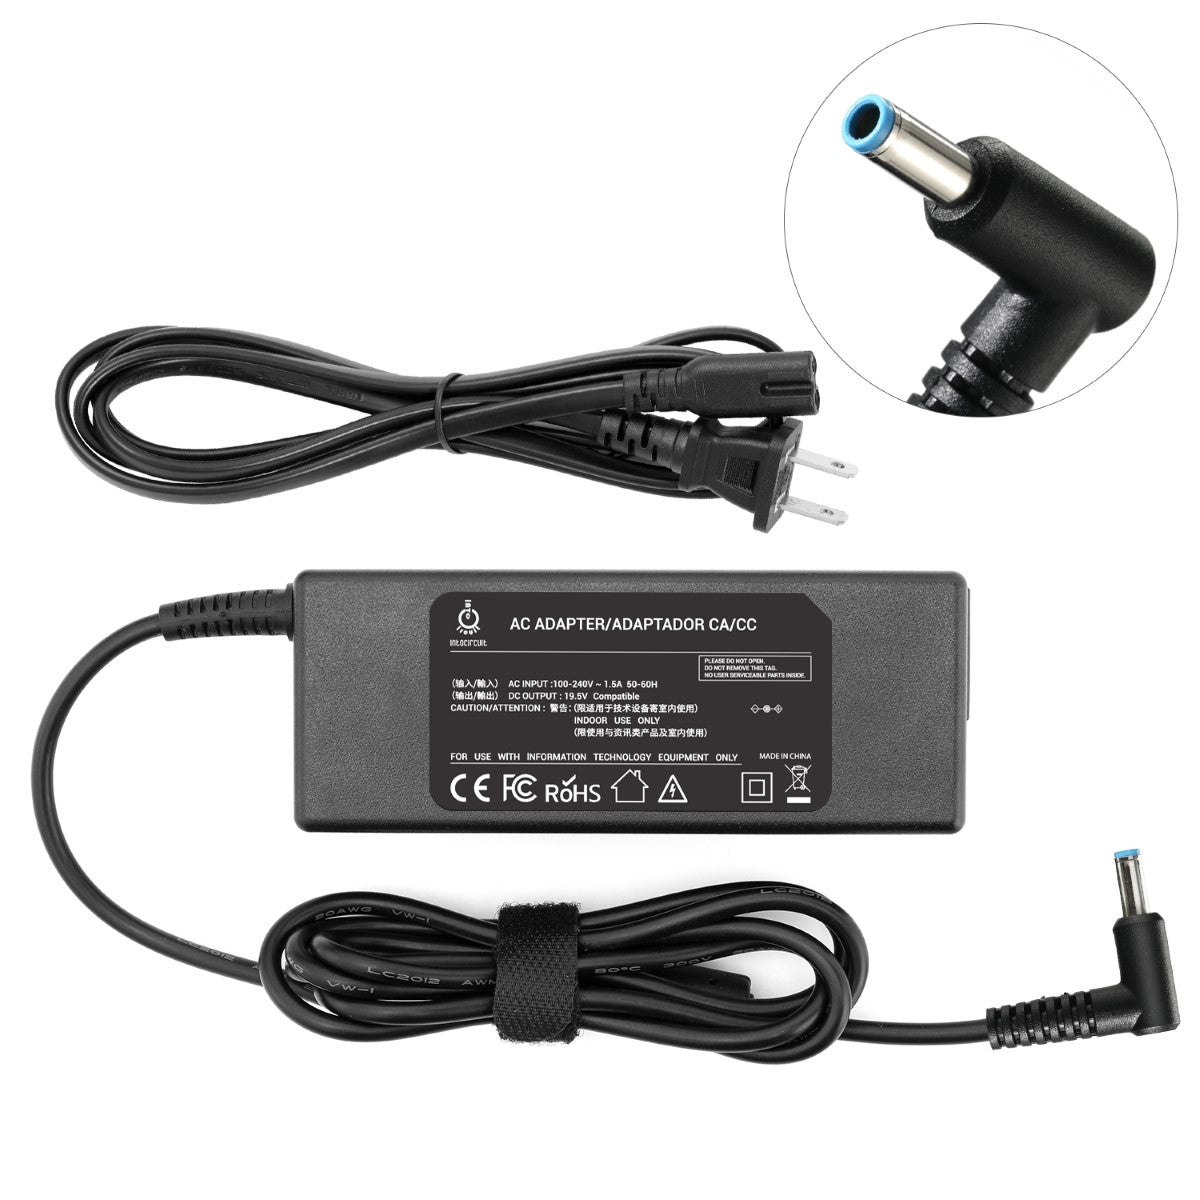 AC Adapter Charger for HP ZBook 15u G4 Notebook